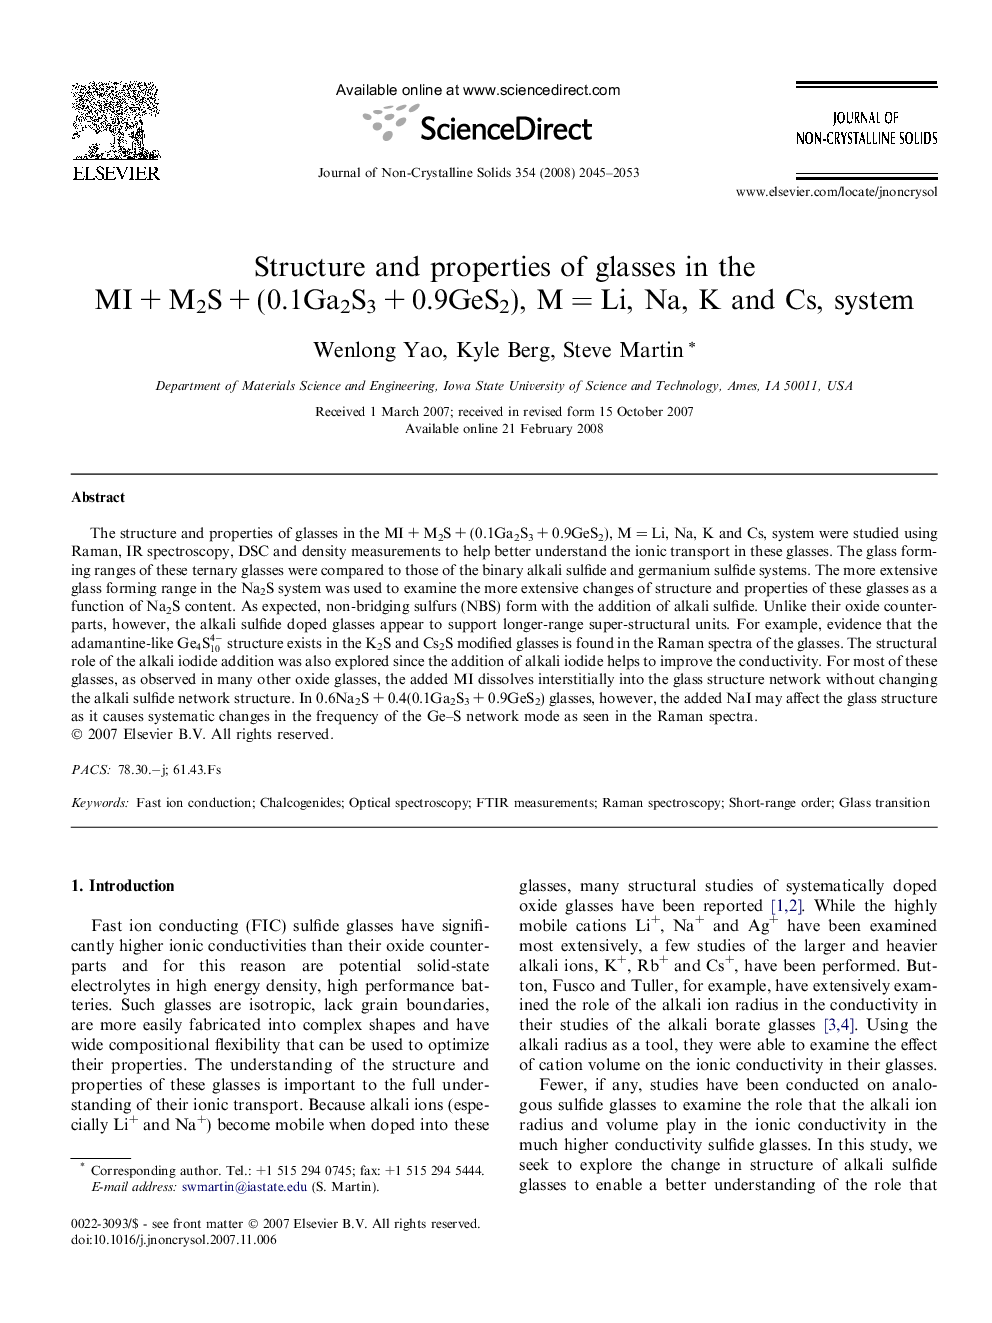 Structure and properties of glasses in the MI + M2S + (0.1Ga2S3 + 0.9GeS2), M = Li, Na, K and Cs, system